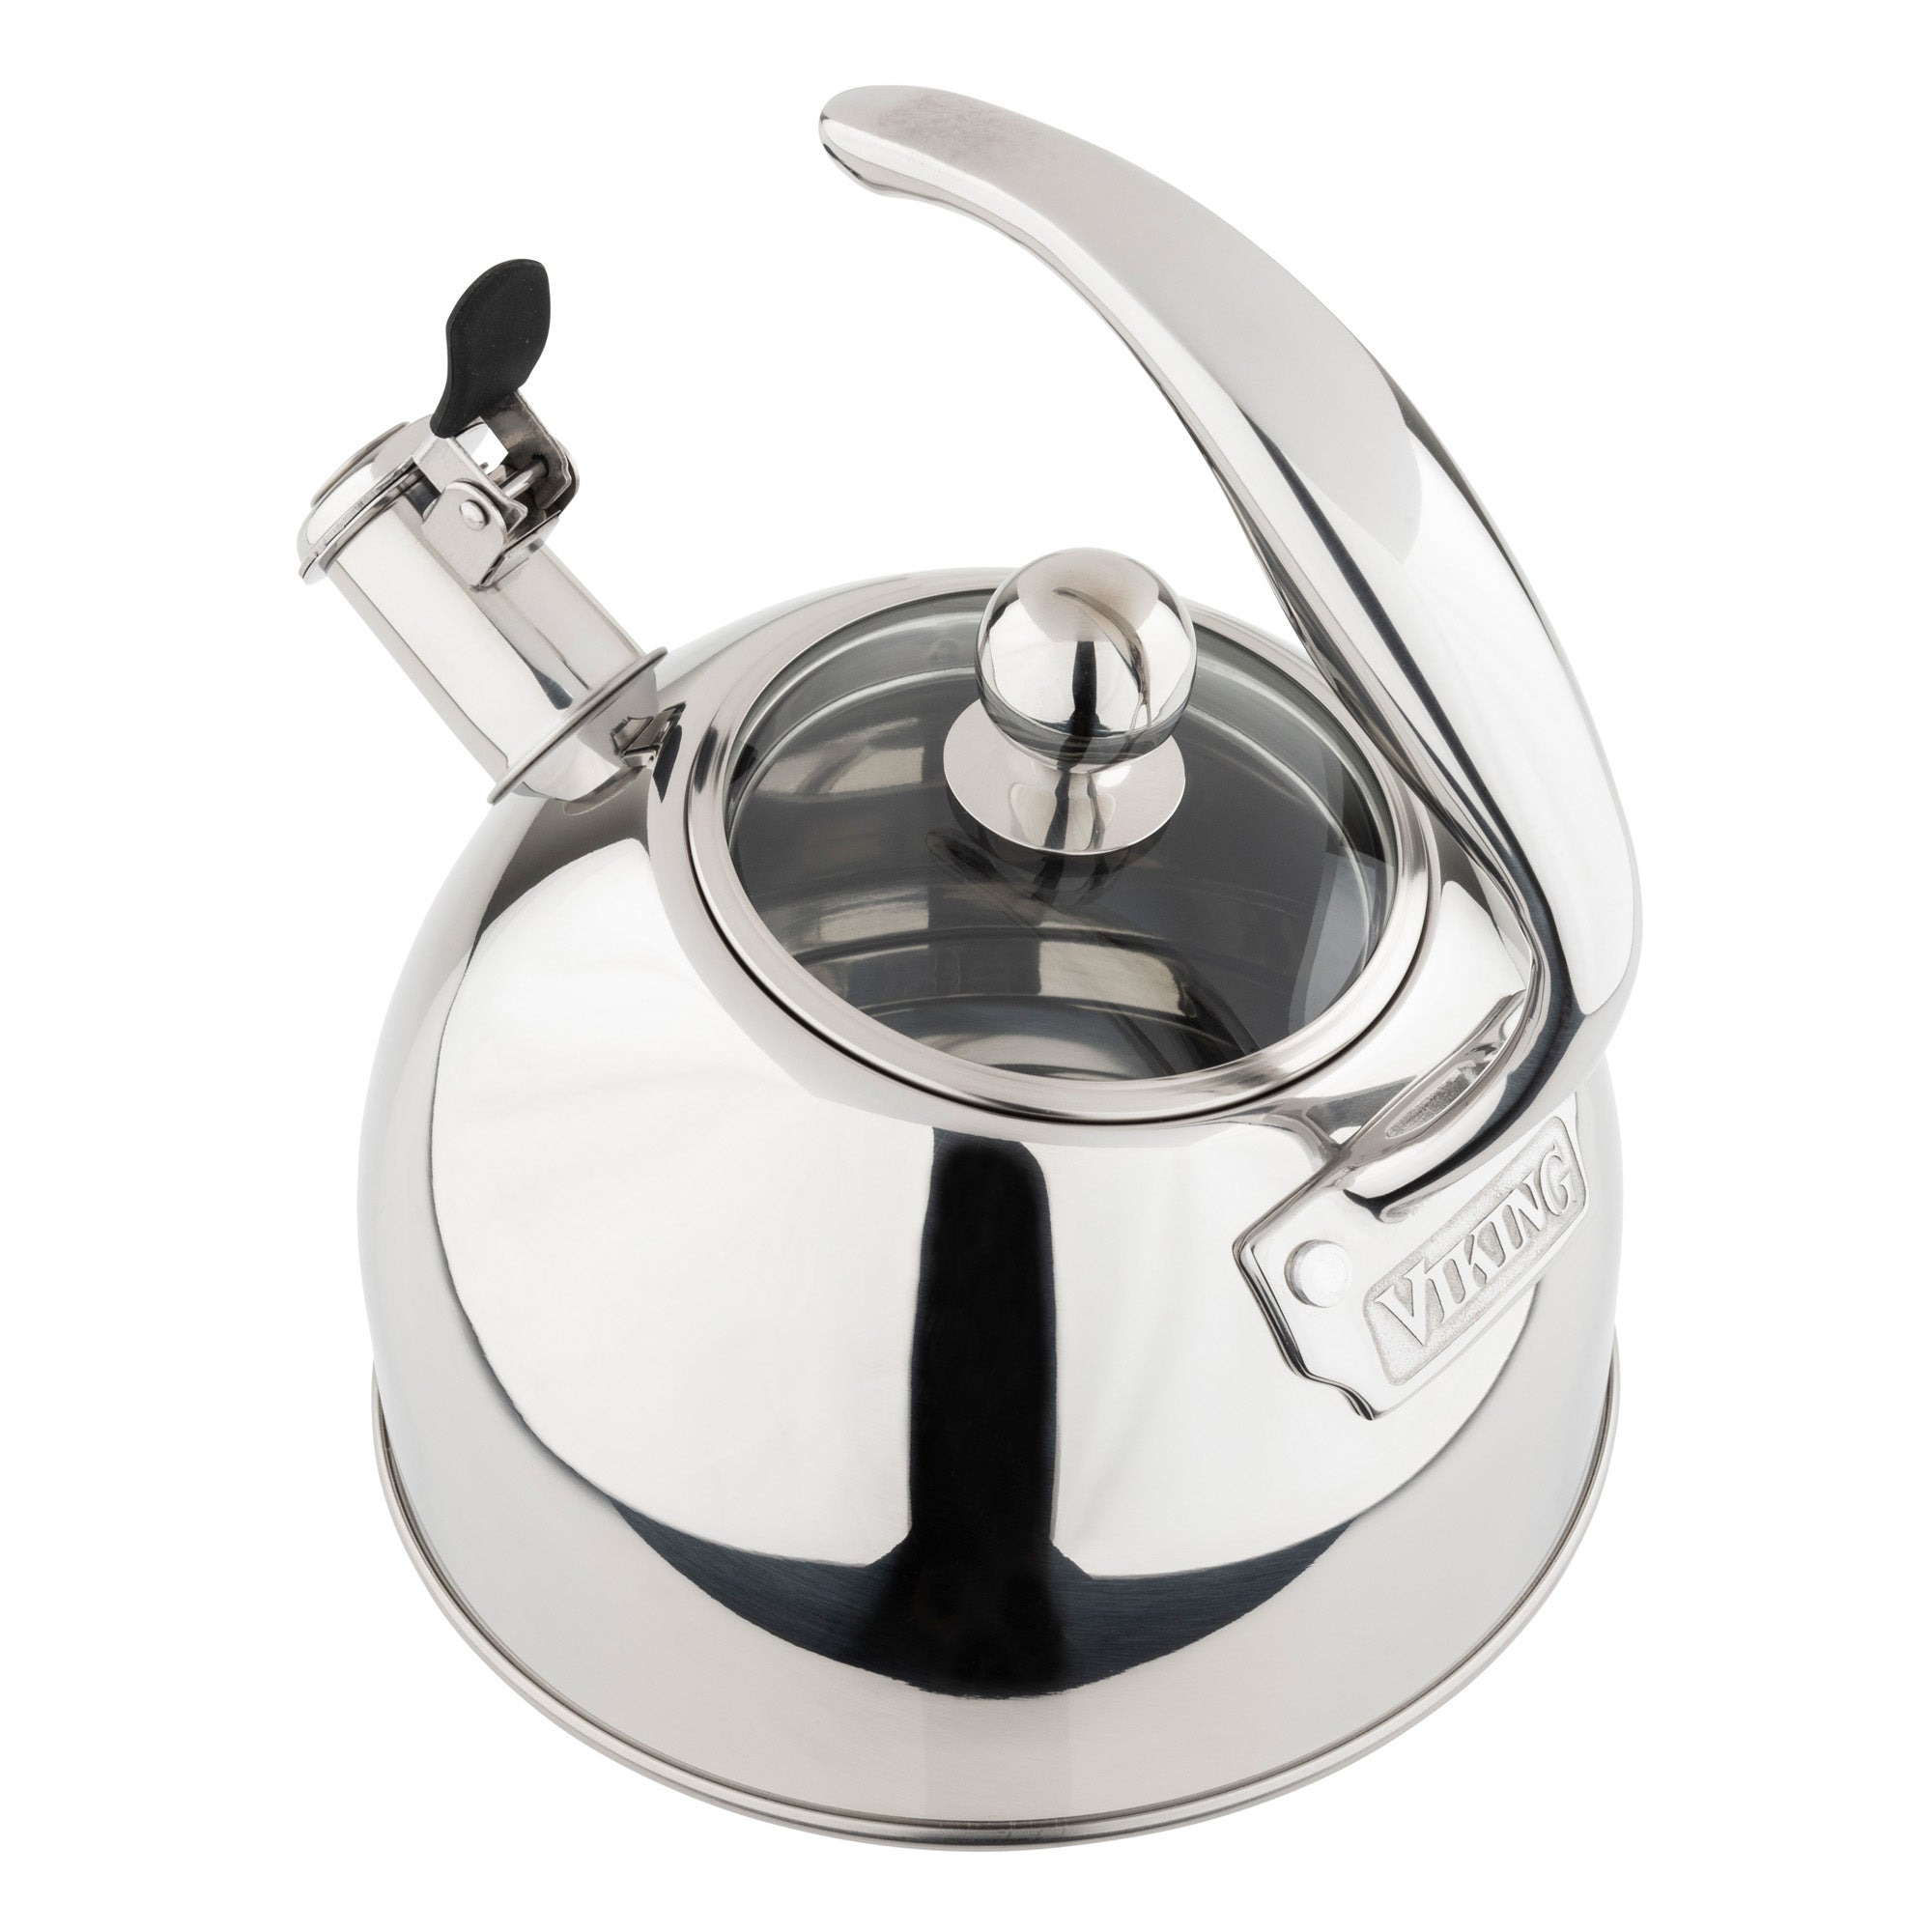 Viking 2.6-Quart Mirrored Stainless Steel Whistling Kettle with 3-Ply Base